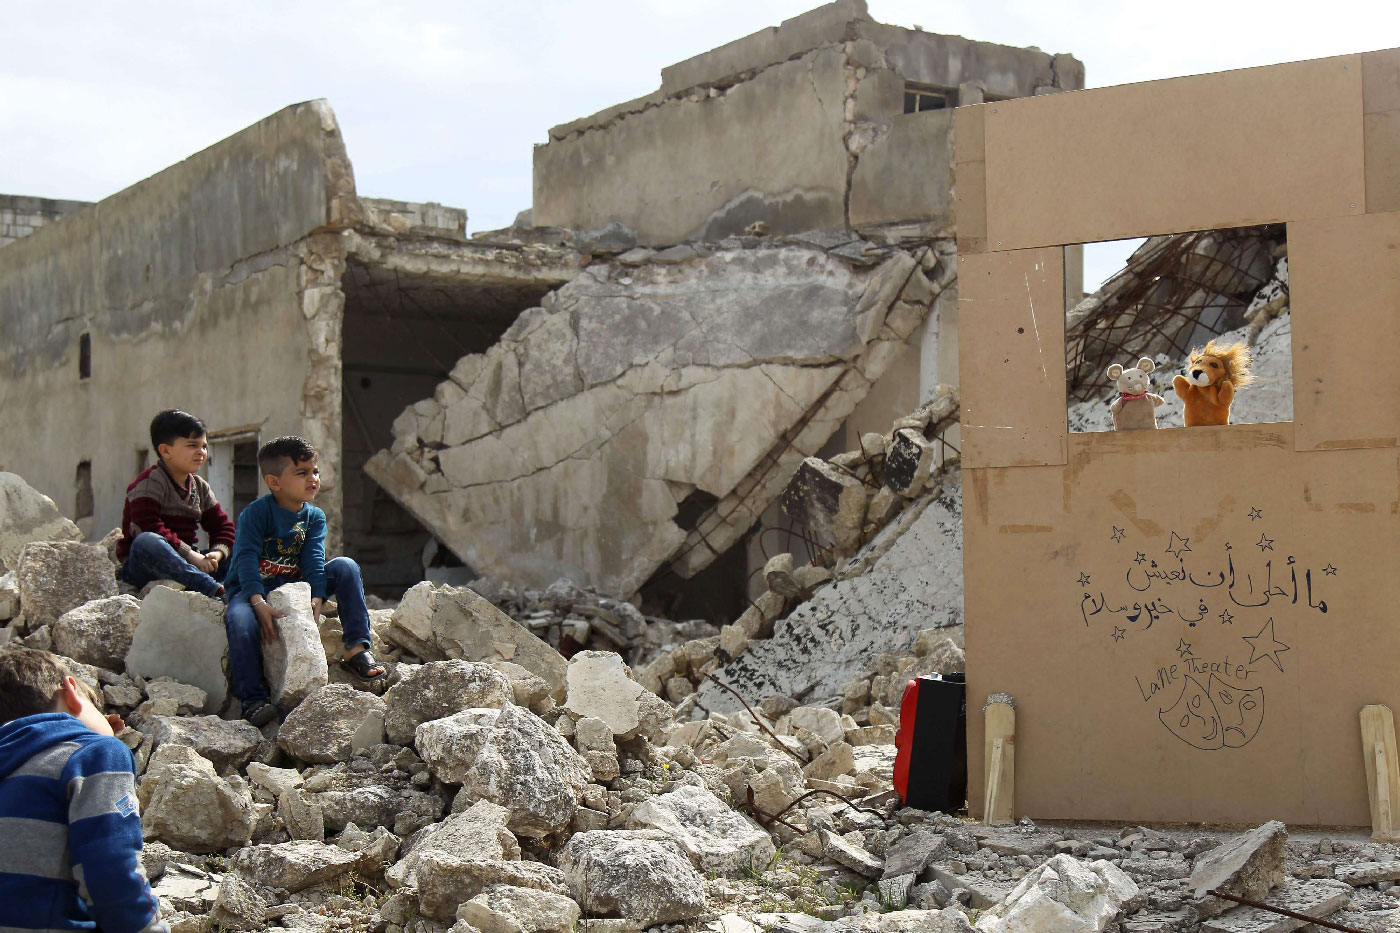 Children watch a puppet show performed by a Syrian actor, through a makeshift puppet theatre set up among the rubble of collapsed buildings in the town of Saraqib.